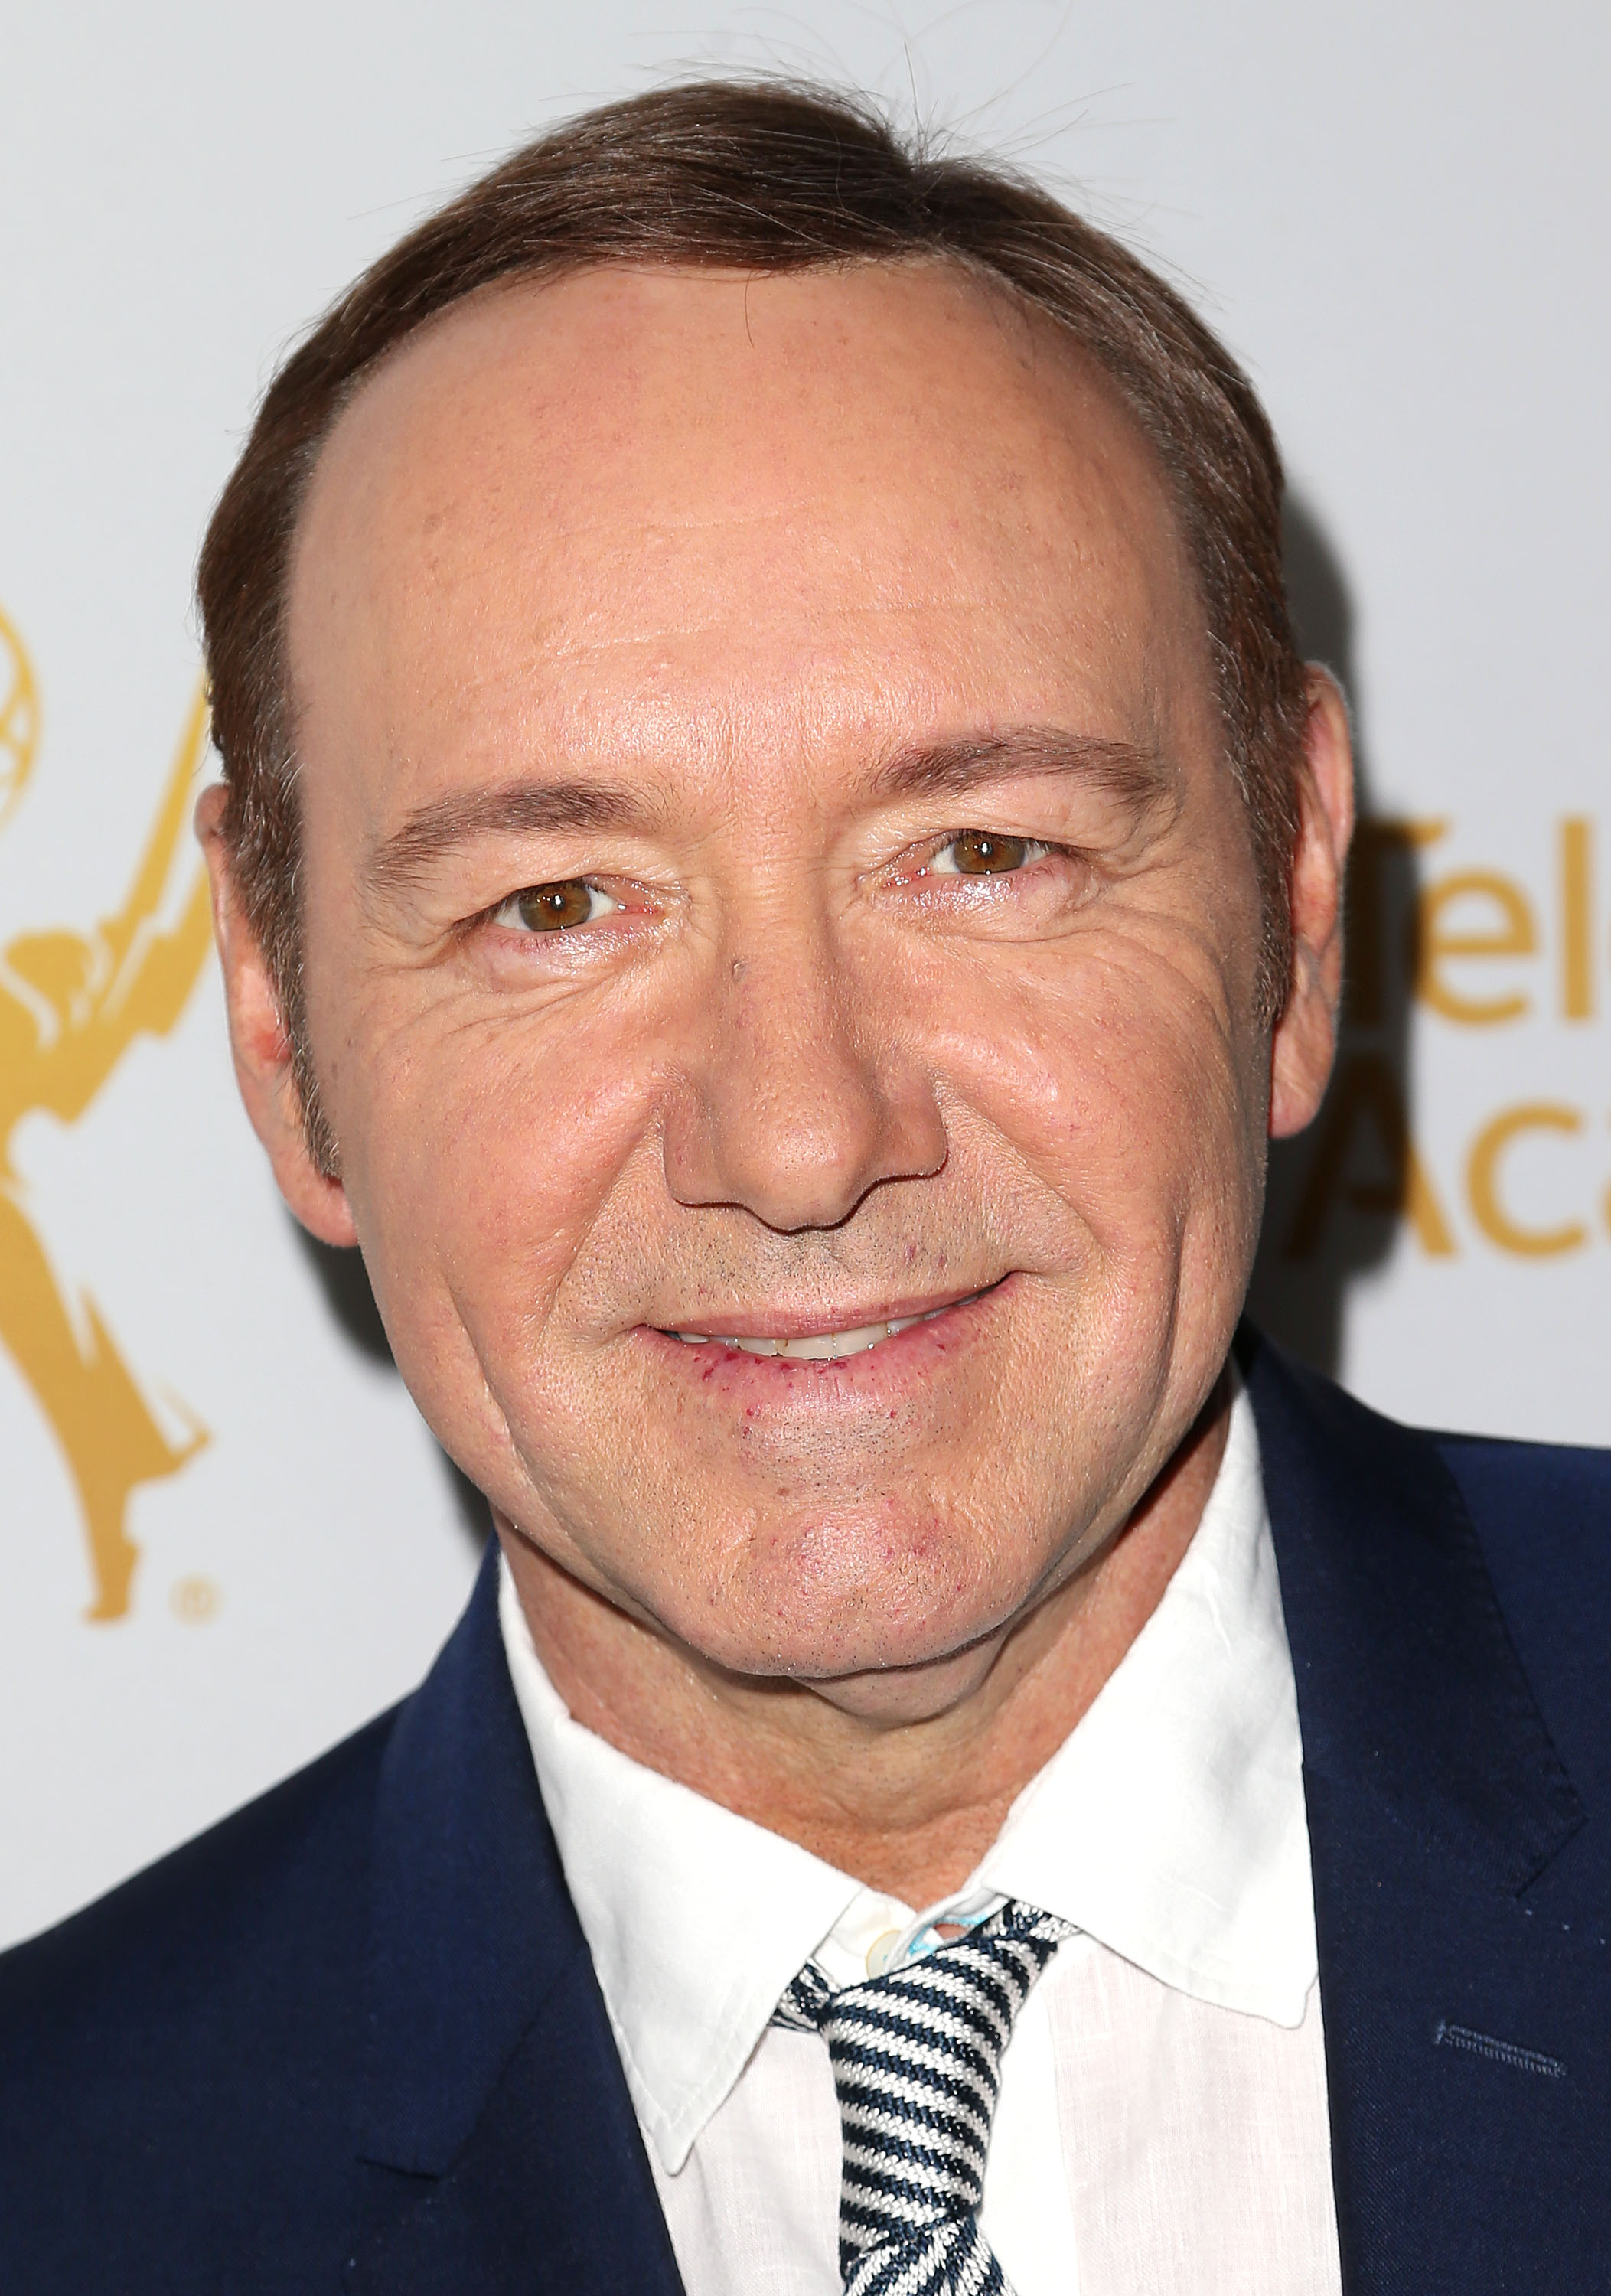 House of Cards Season 3 Spoilers: KEVIN SPACEY Spotted Shooting.